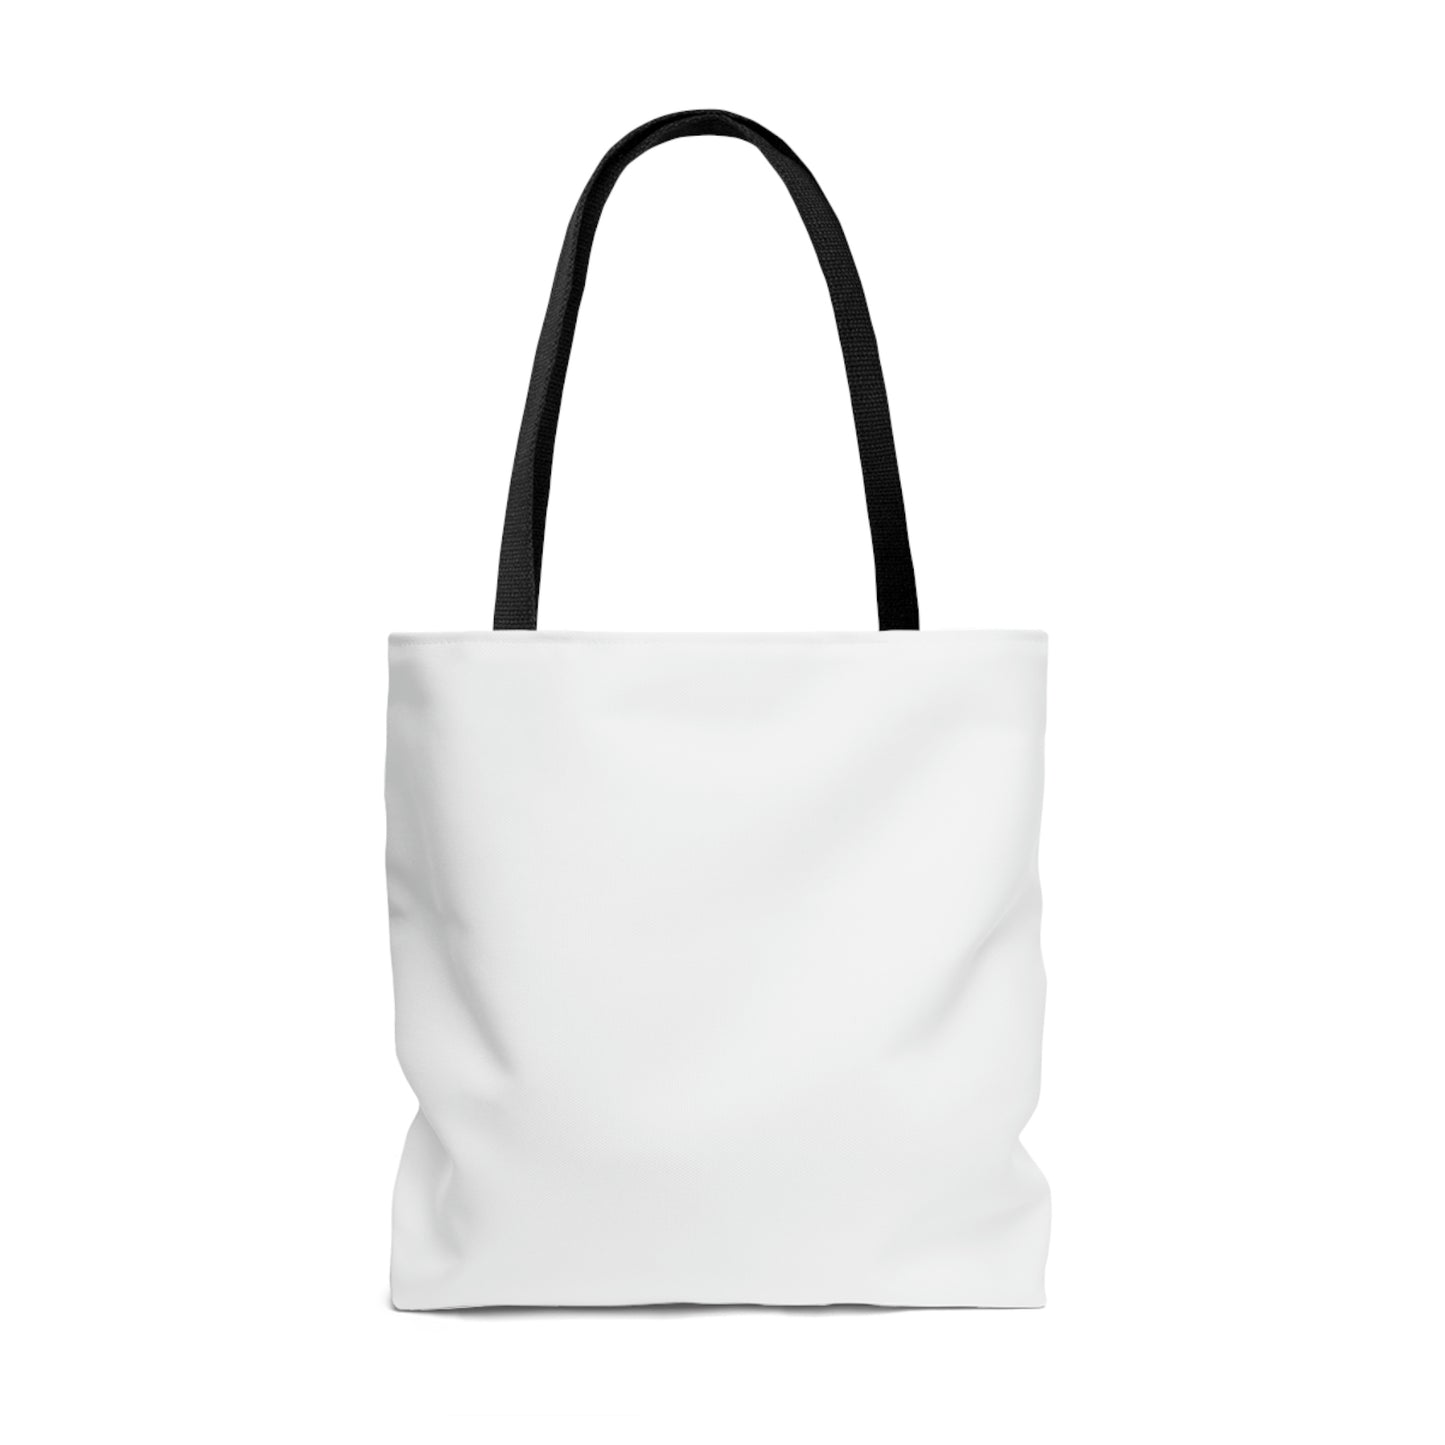 Young, Wild and Free Tote Bag